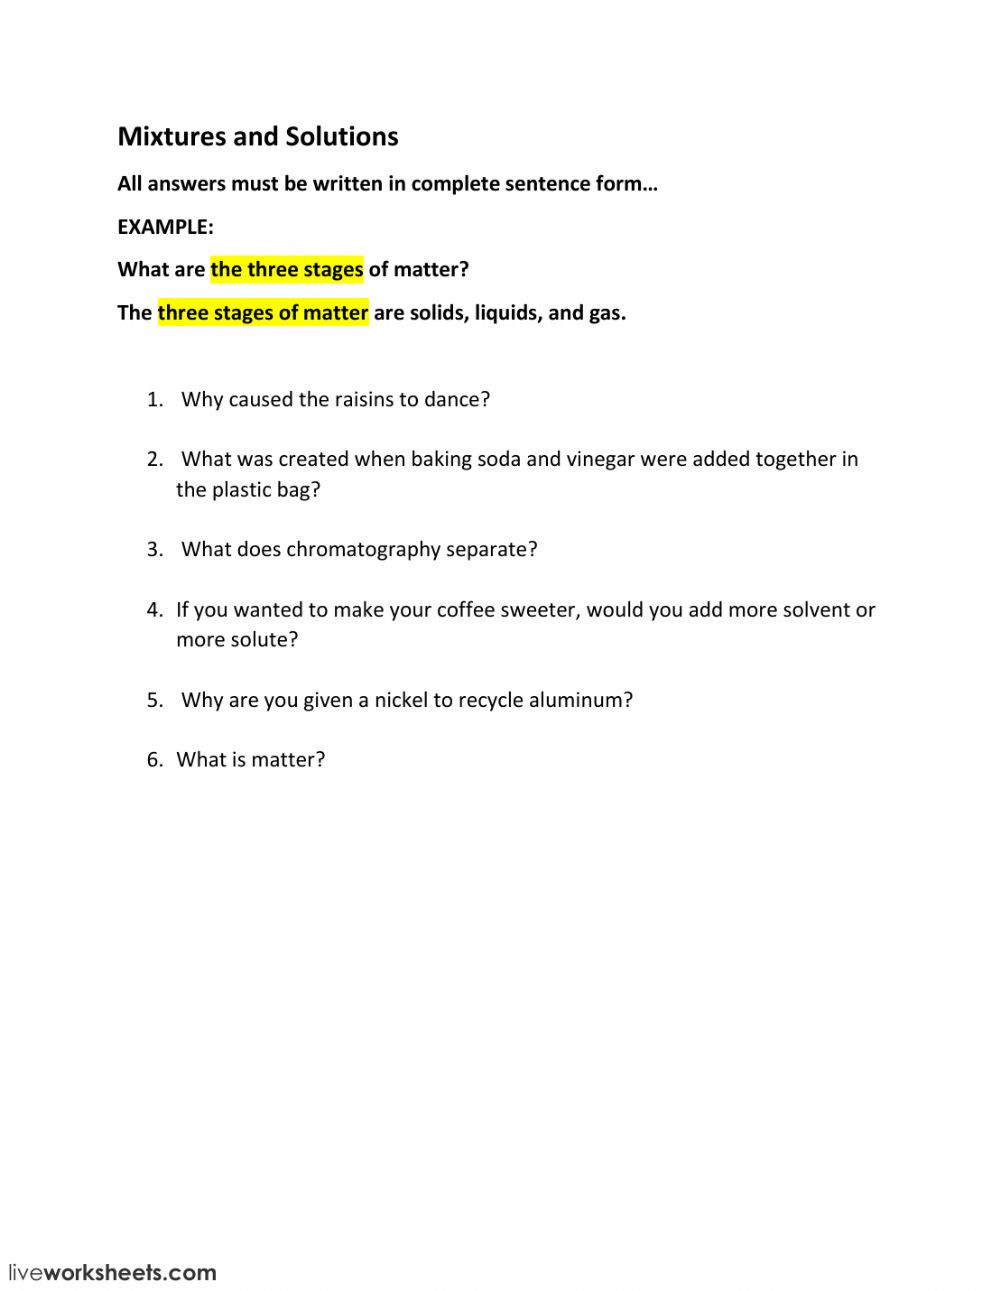 Mixtures and solutions Worksheet Answers Mixtures and solutions Interactive Worksheet